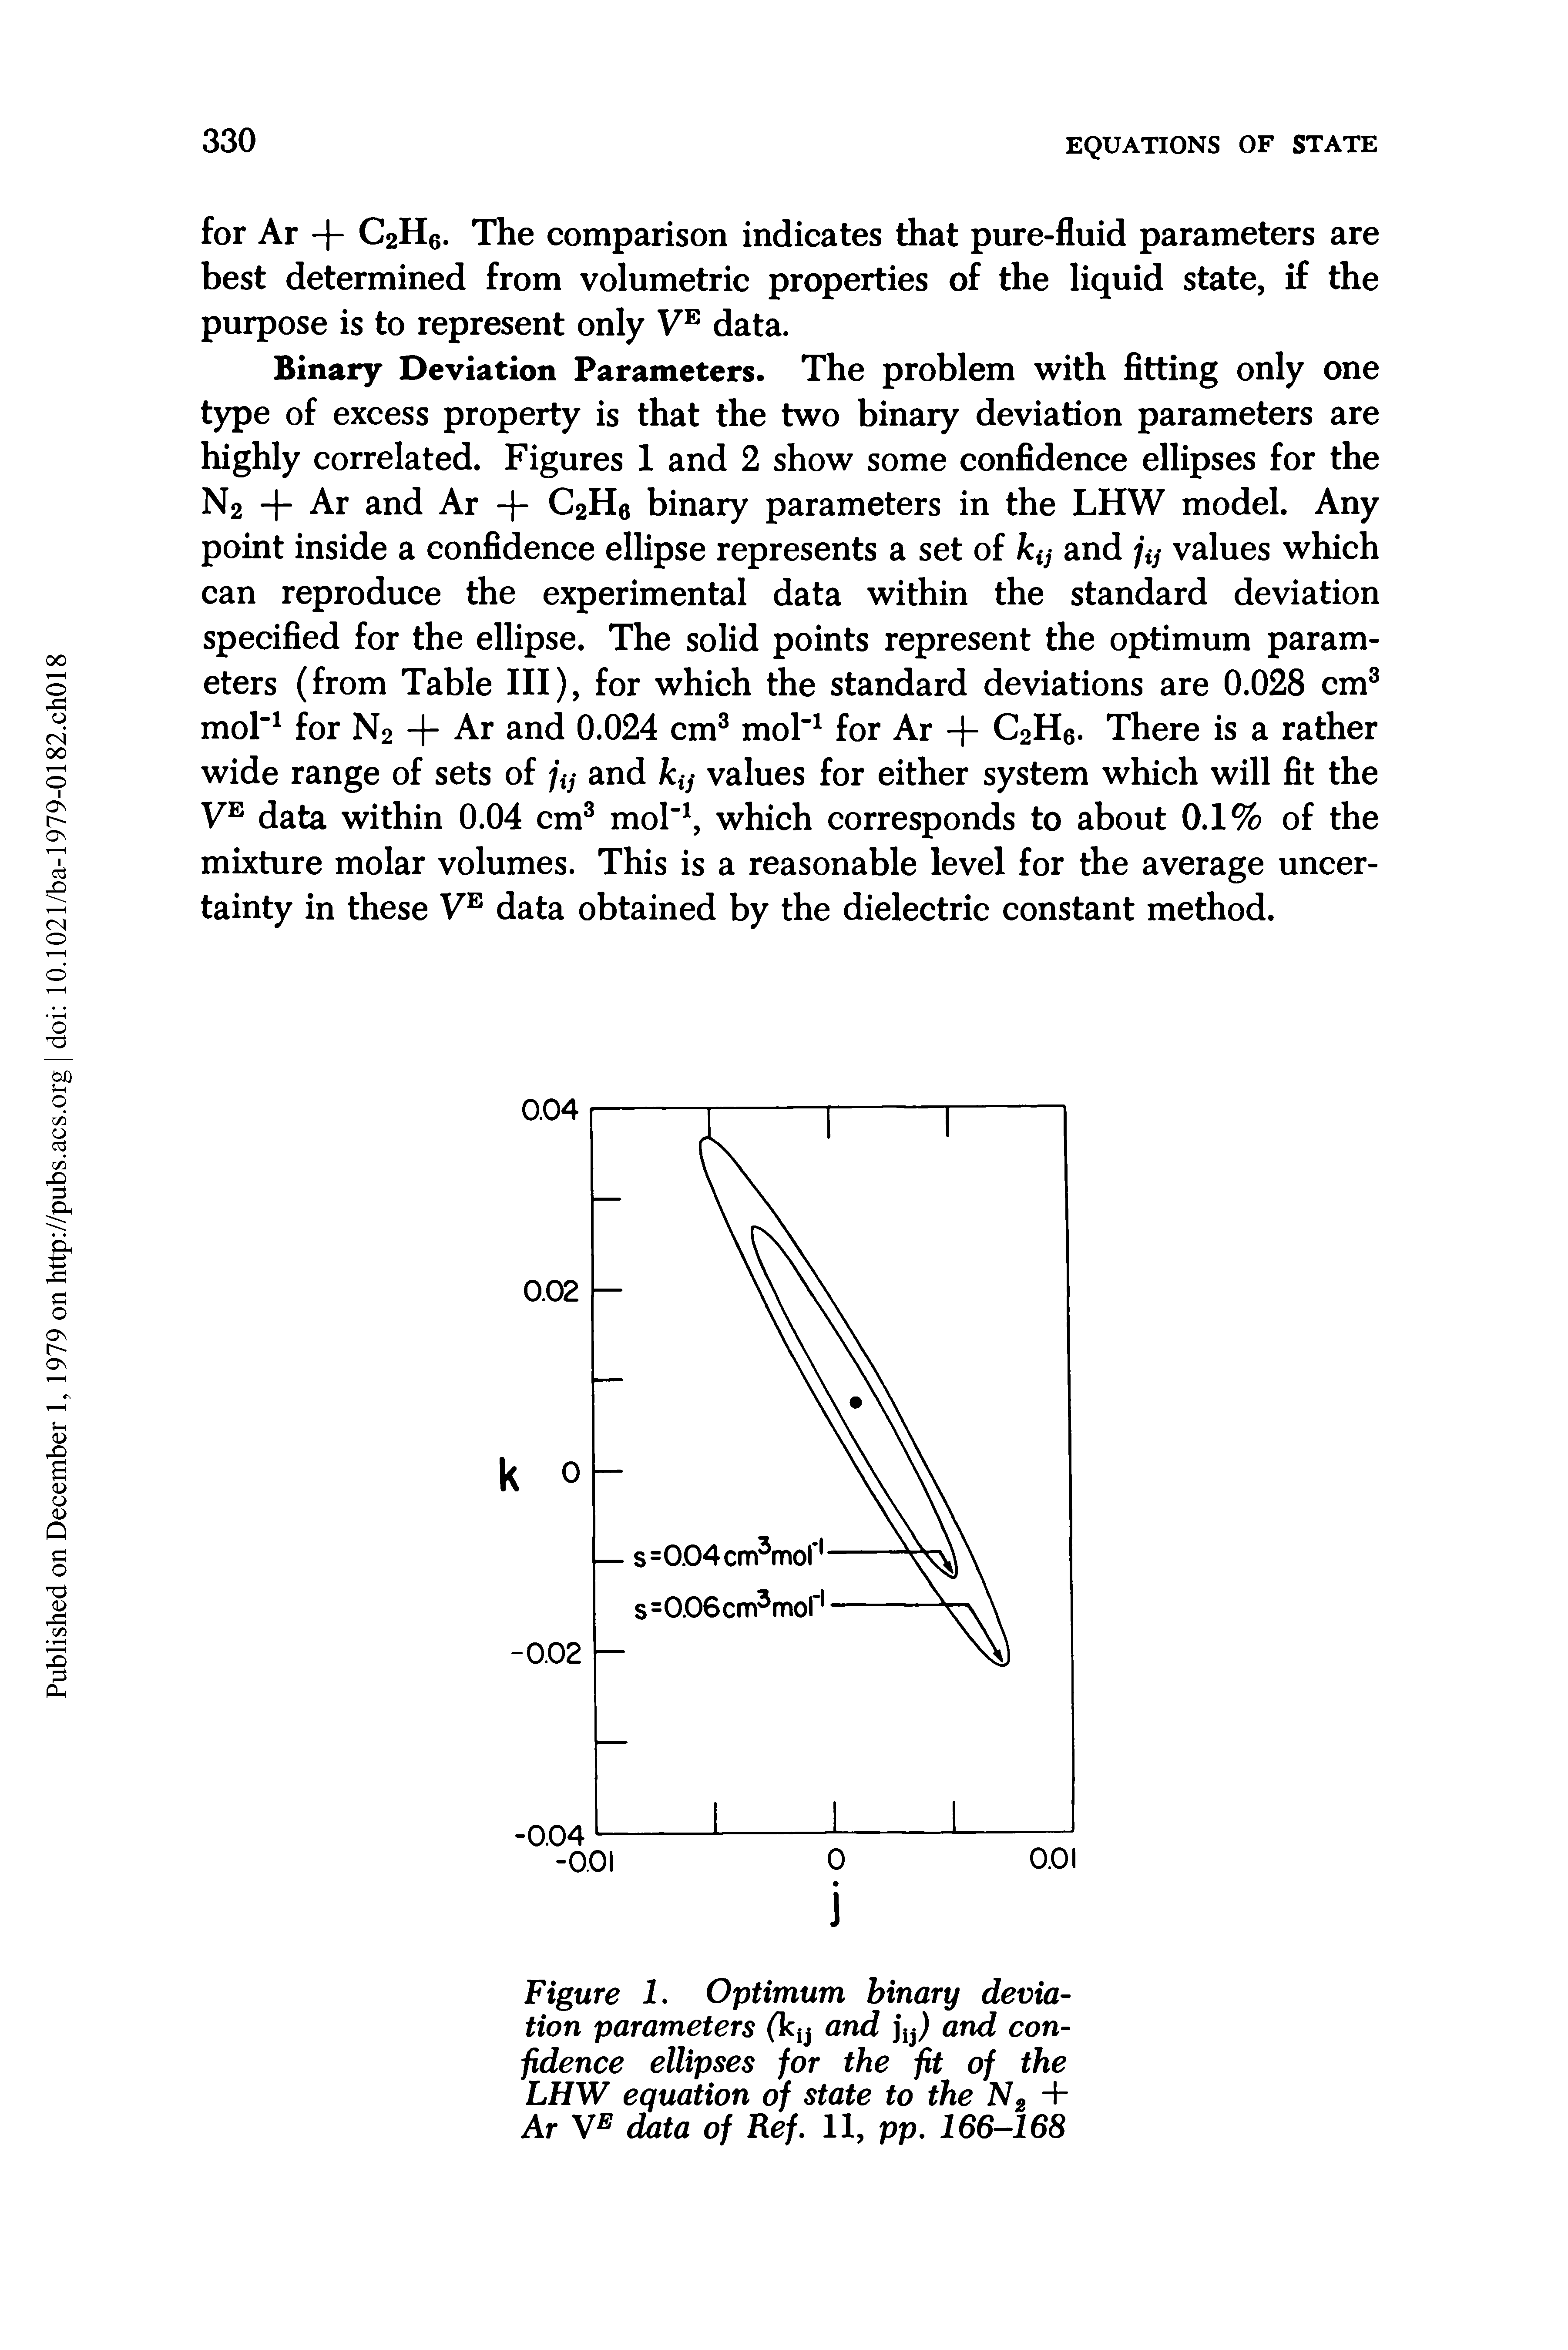 Figure 1. Optimum binary deviation parameters (k and ji j) and confidence ellipses for the fit of the LHW equation of state to the Nz + Ar VE data of Ref. 11, pp. 166-168...